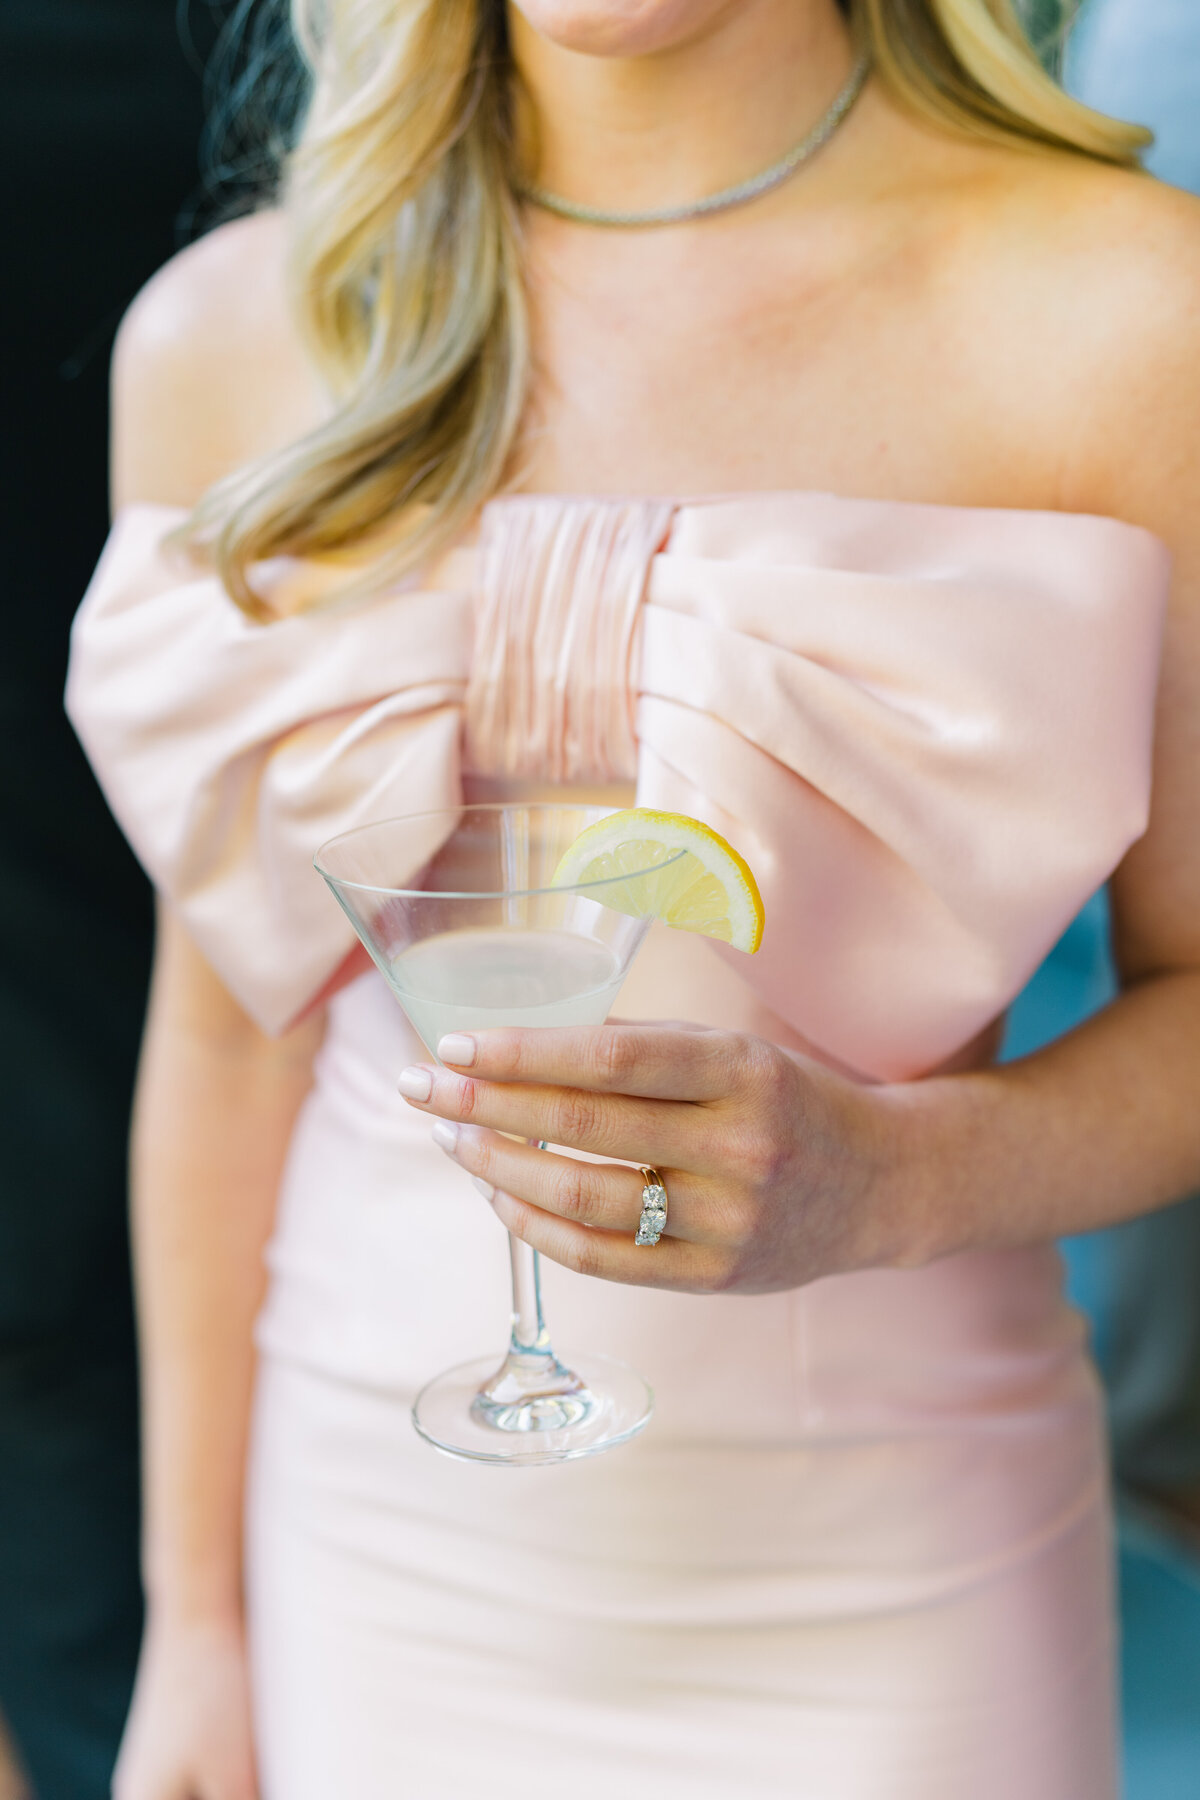 Maid of honor pink dress with large bow on chest. Holding a martini with a lemon garnish.